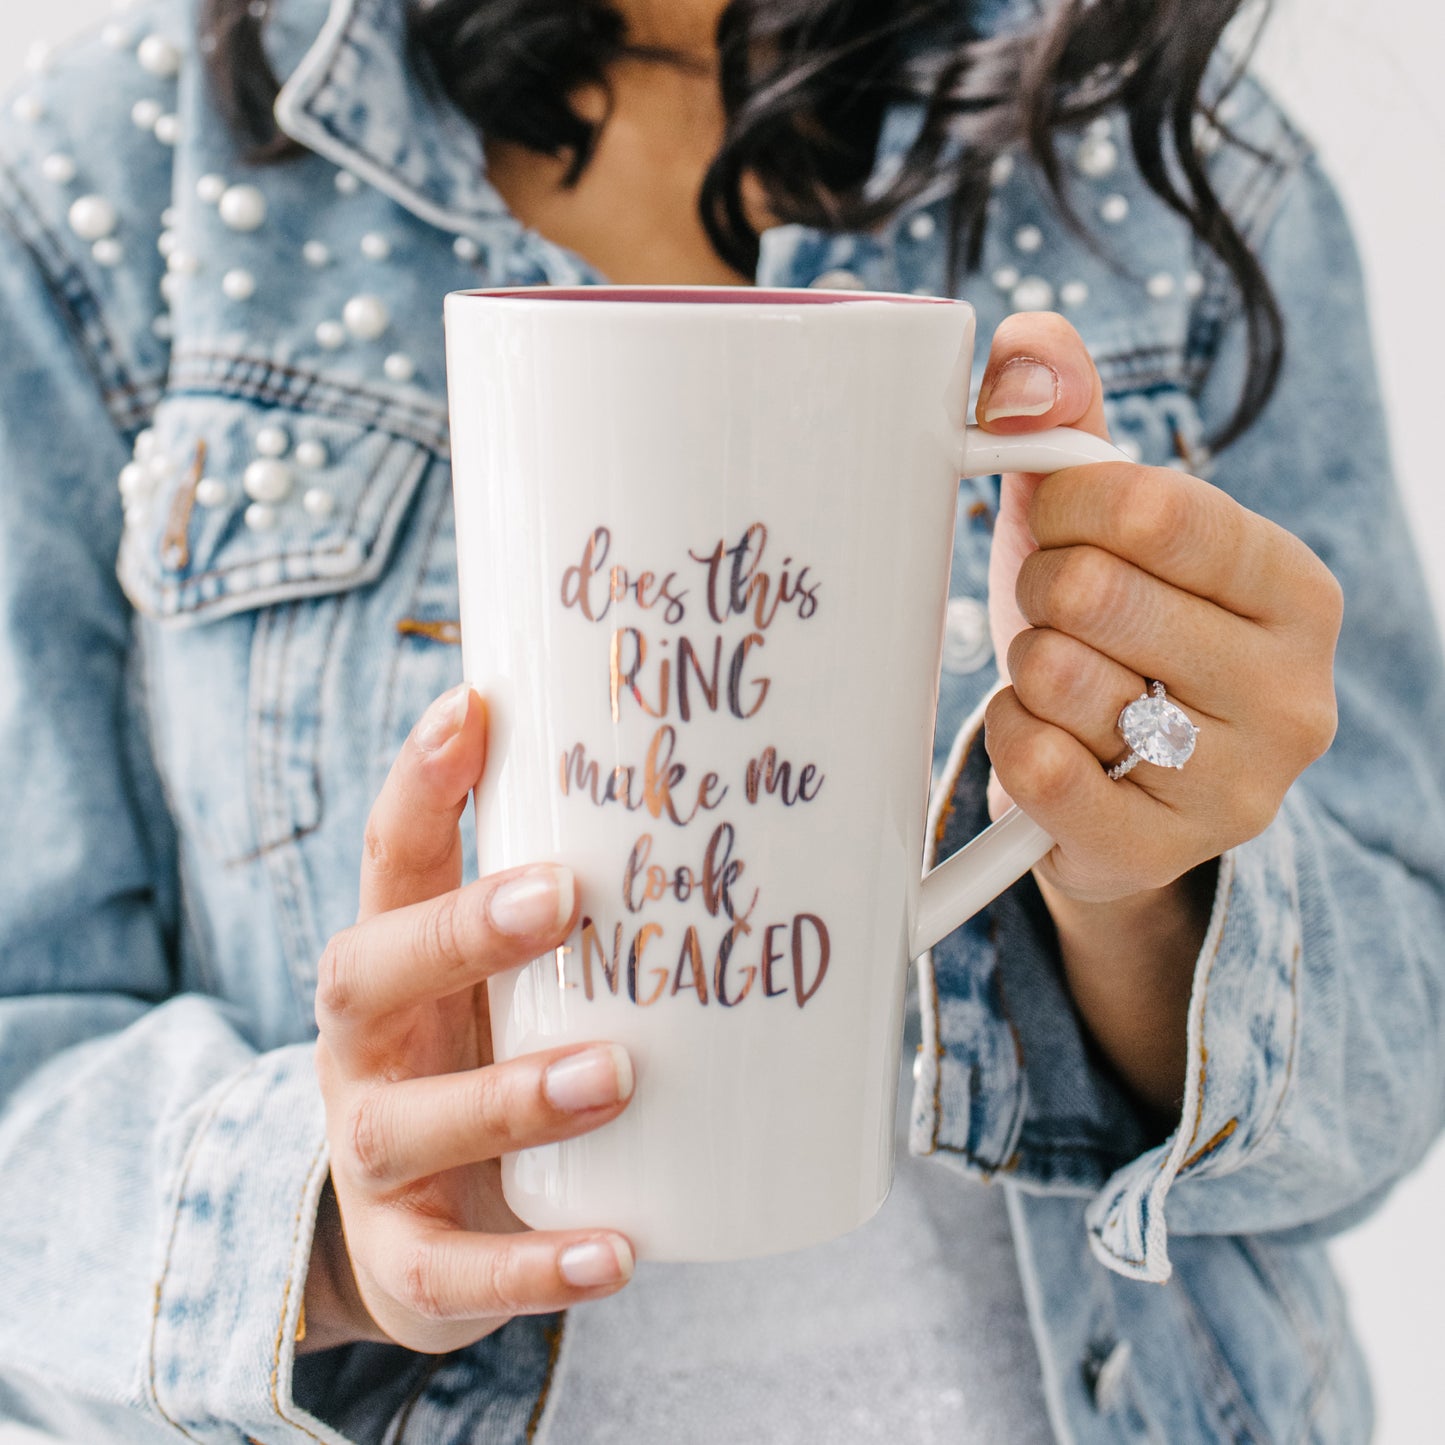 Cute ceramic mug that reads "Does This Ring Make Me Look Engaged?".